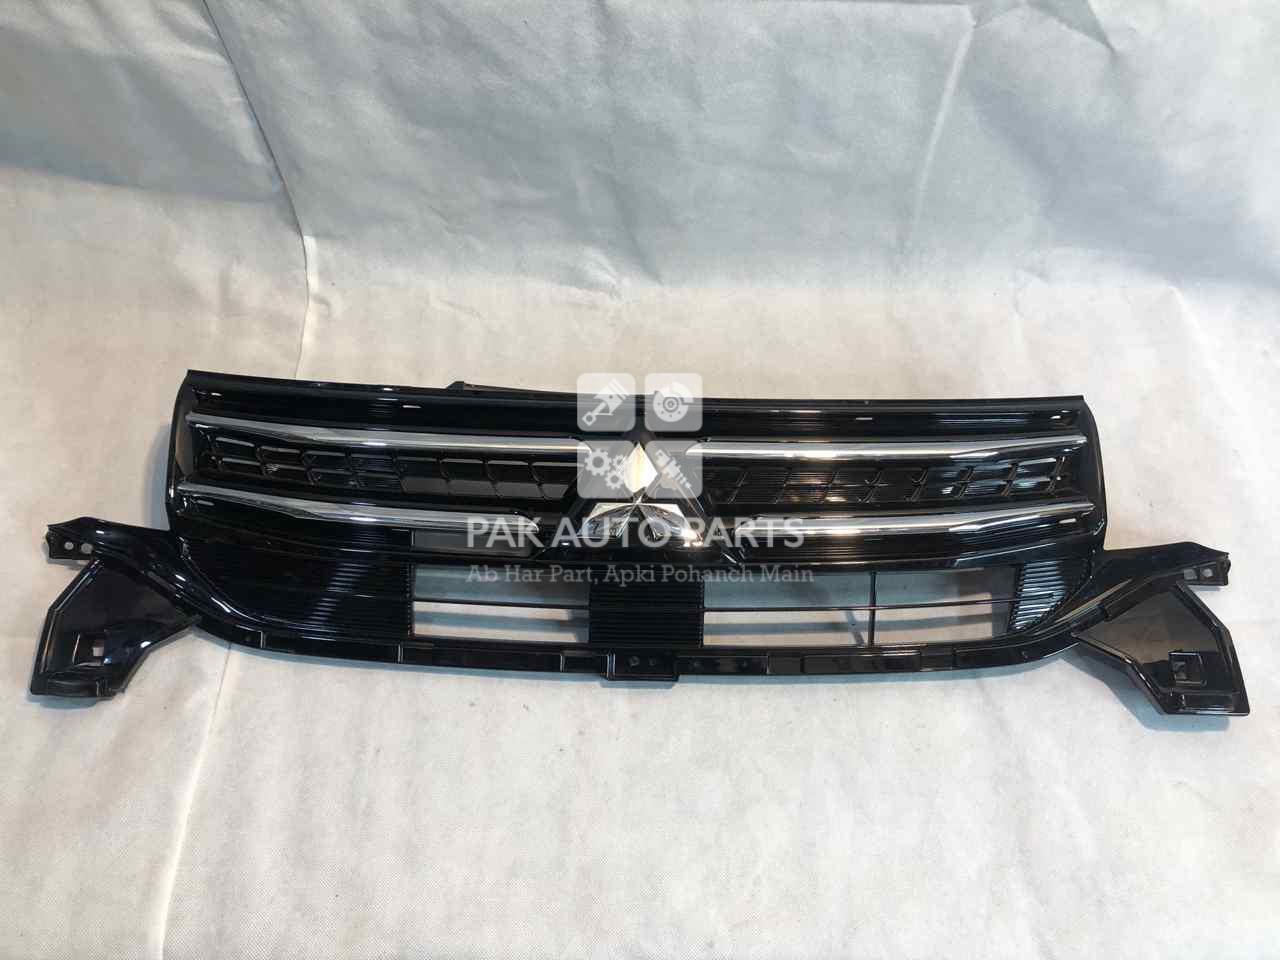 Picture of Mitsubishi EK Wagon 2017 Front Grill